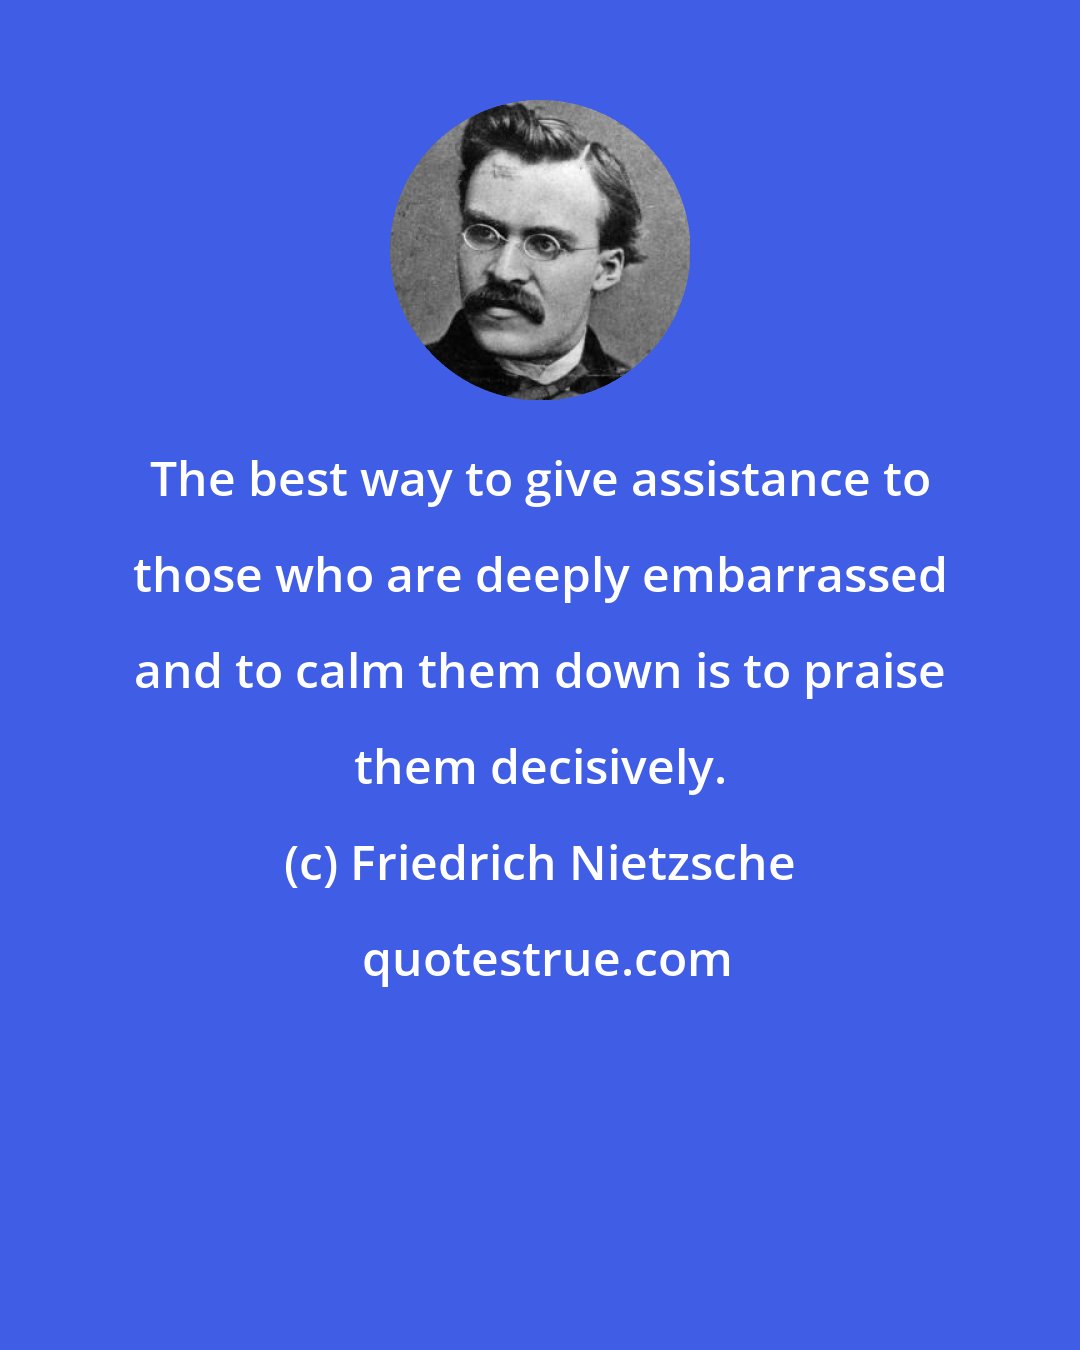 Friedrich Nietzsche: The best way to give assistance to those who are deeply embarrassed and to calm them down is to praise them decisively.